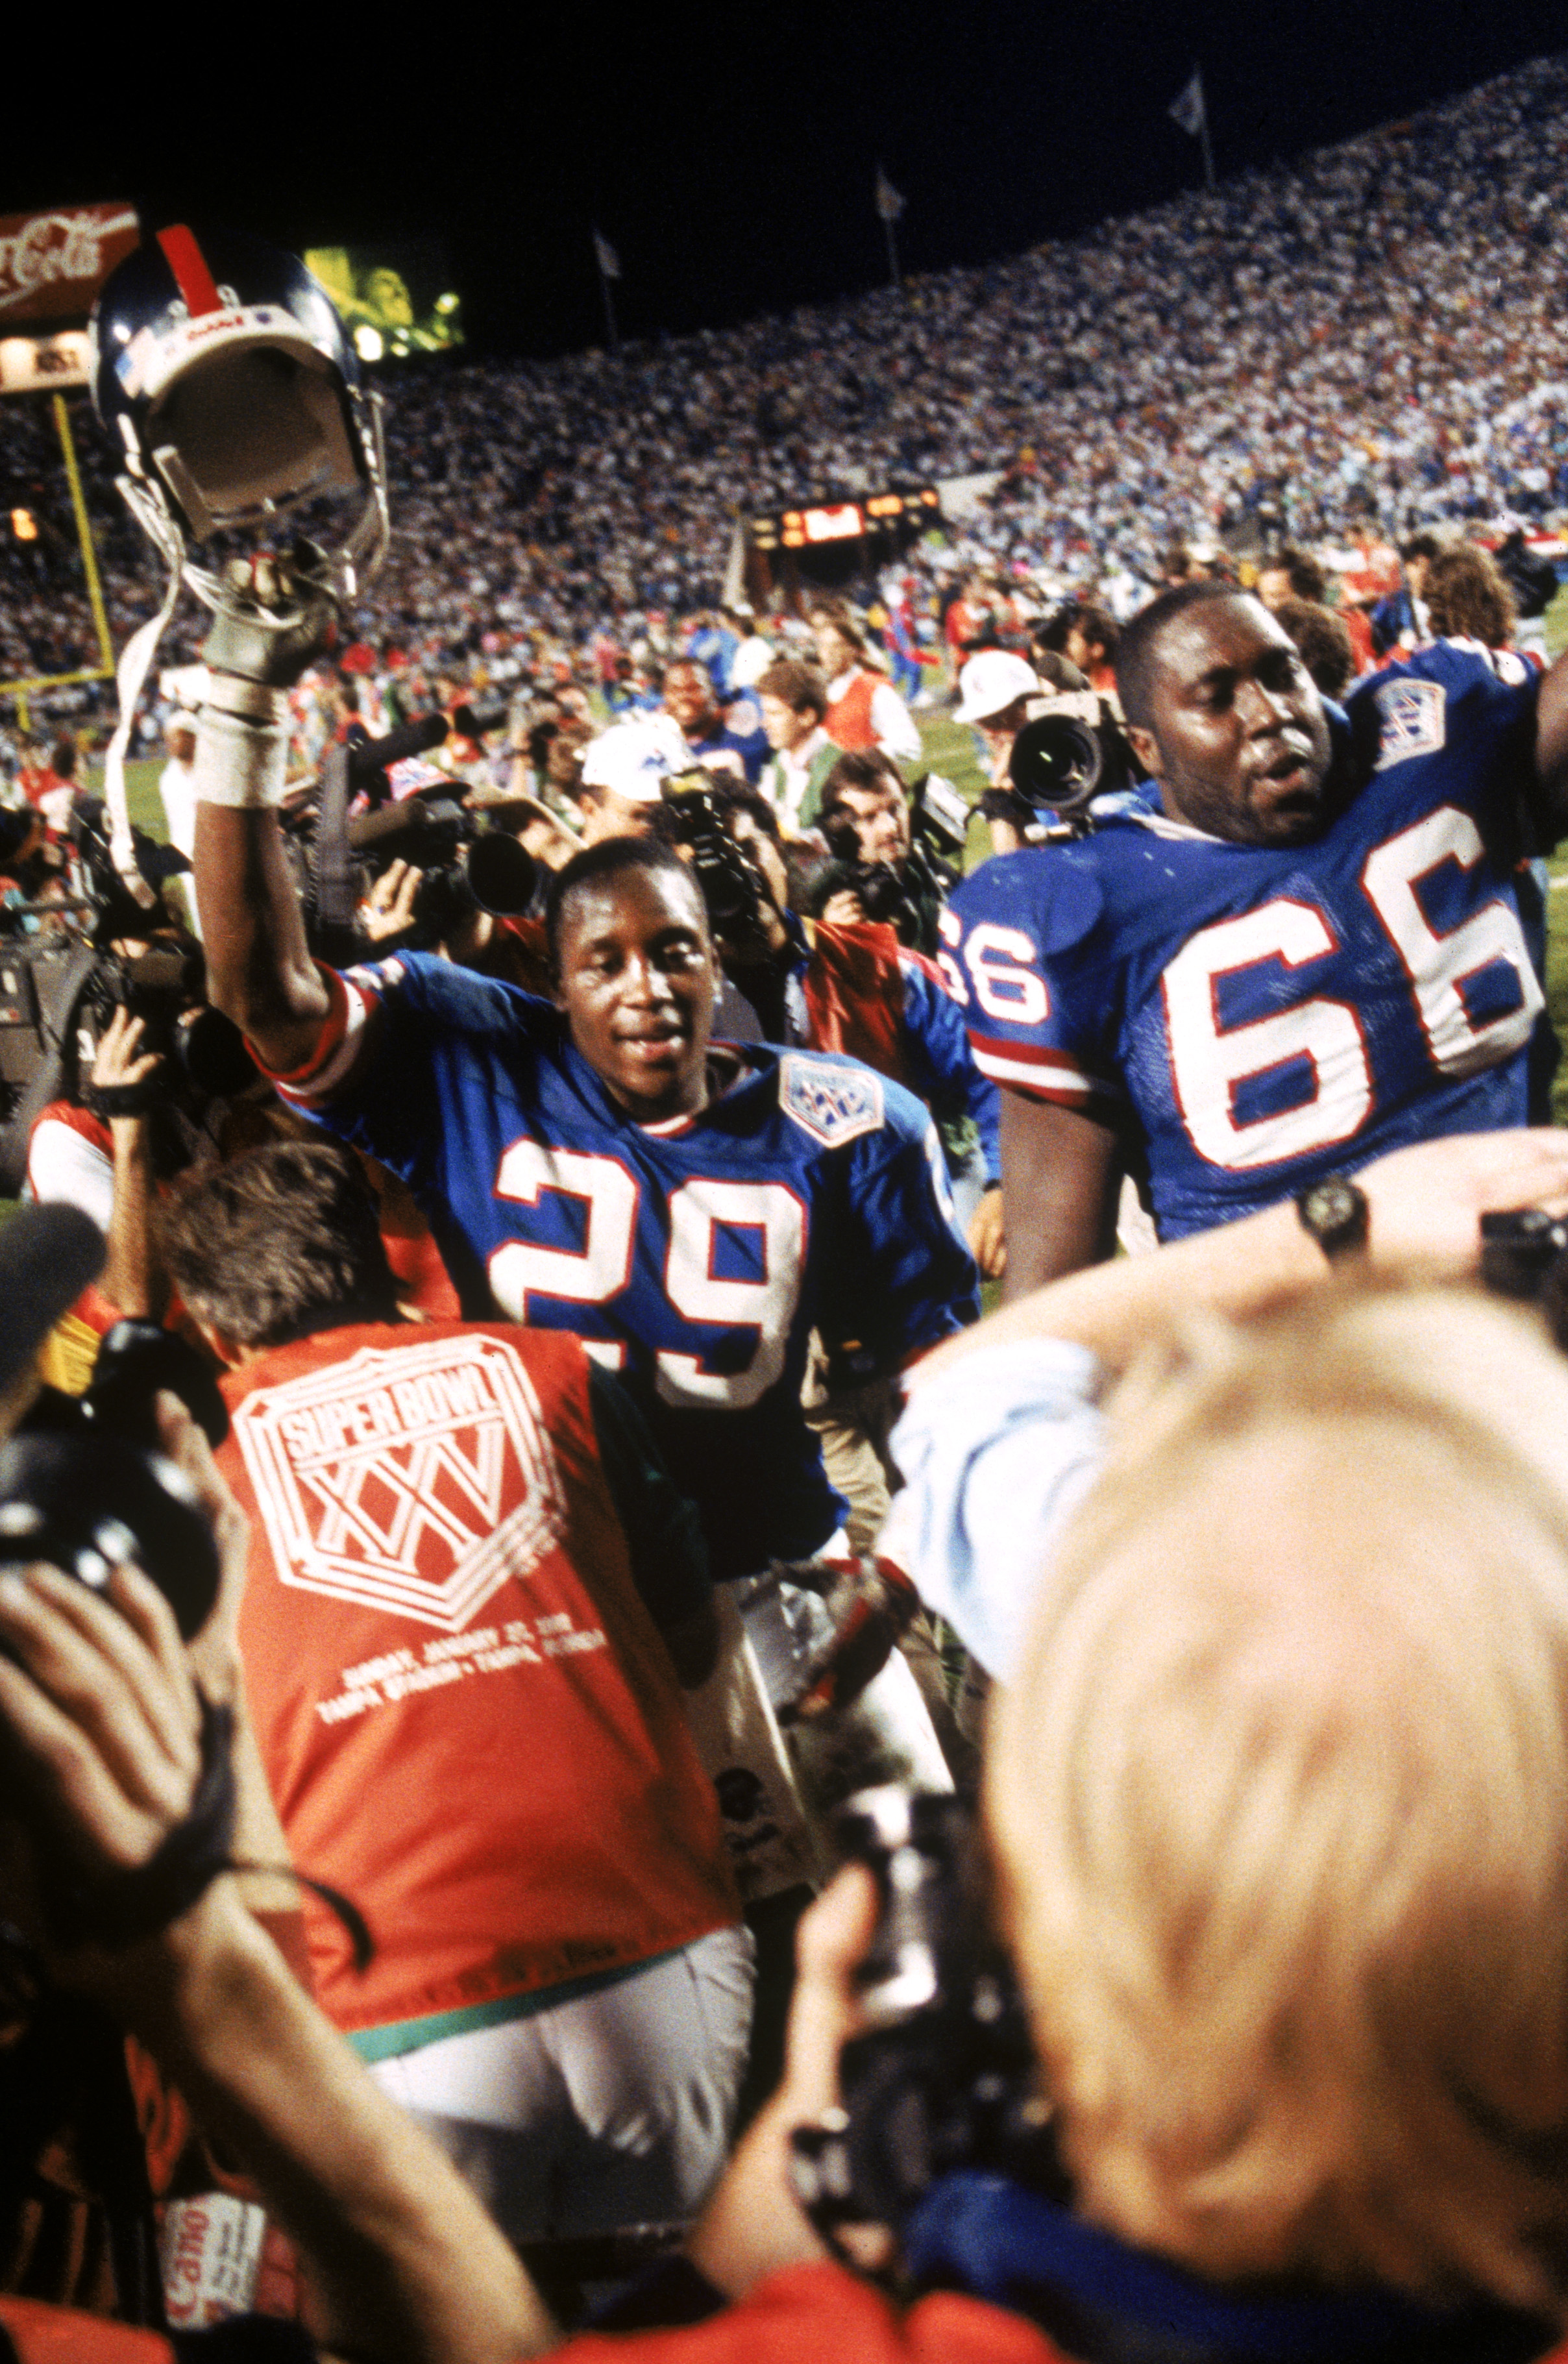 TAMPA, FL - JANUARY 27:  Safety Myron Guyton #29 and offensive tackle William Roberts #66 of the New York Giants walk off the field following the game against the Buffalo Bills during Super Bowl XXV at Tampa Stadium on January 27, 1991 in Tampa, Florida.